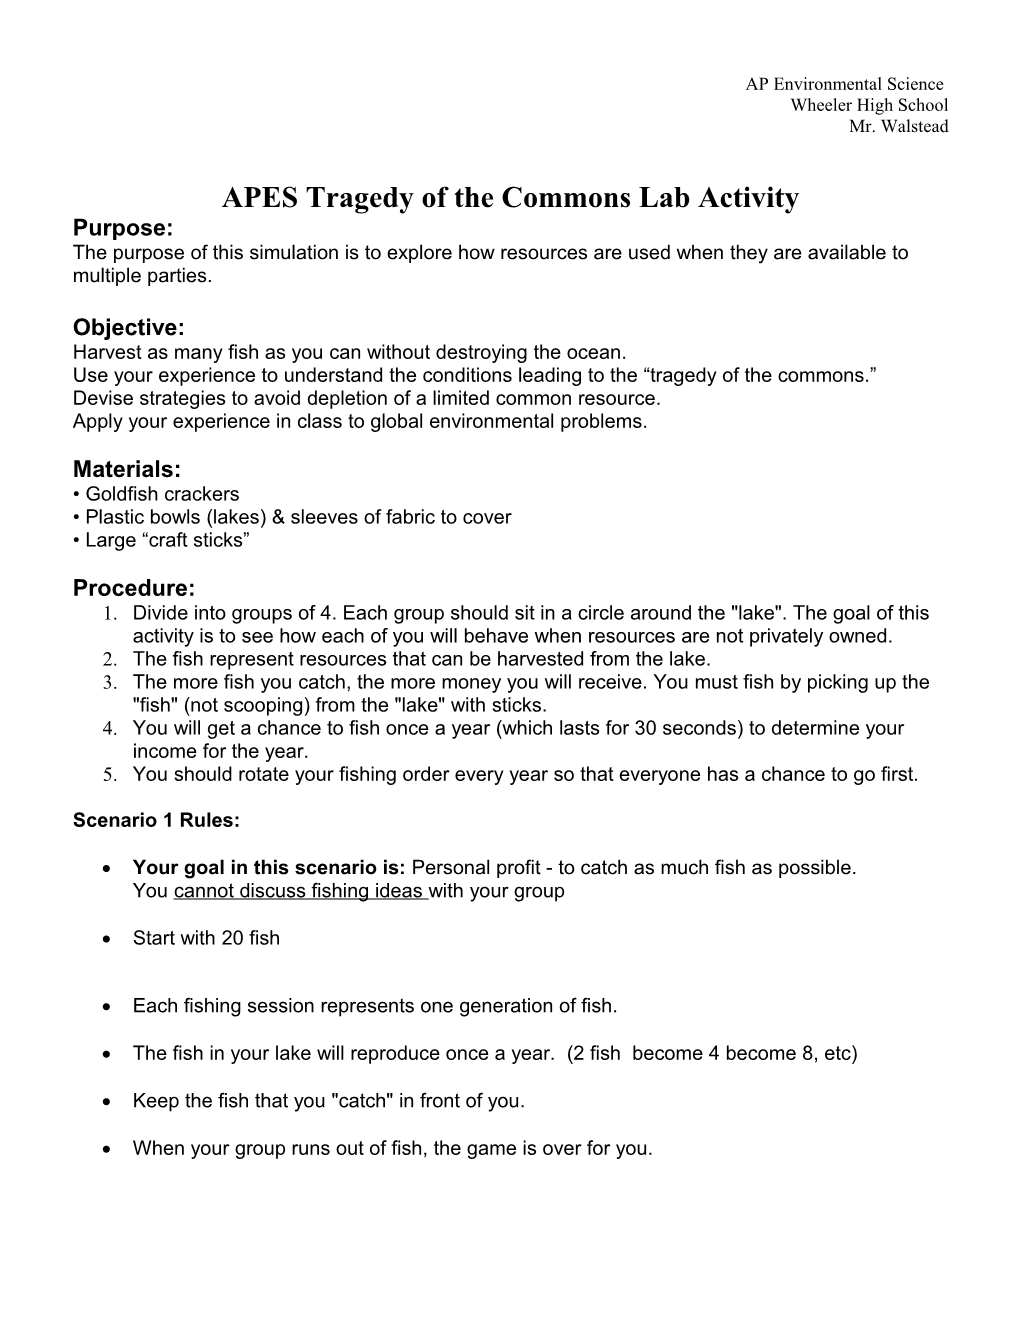 APES Tragedy of the Commons Lab Activity